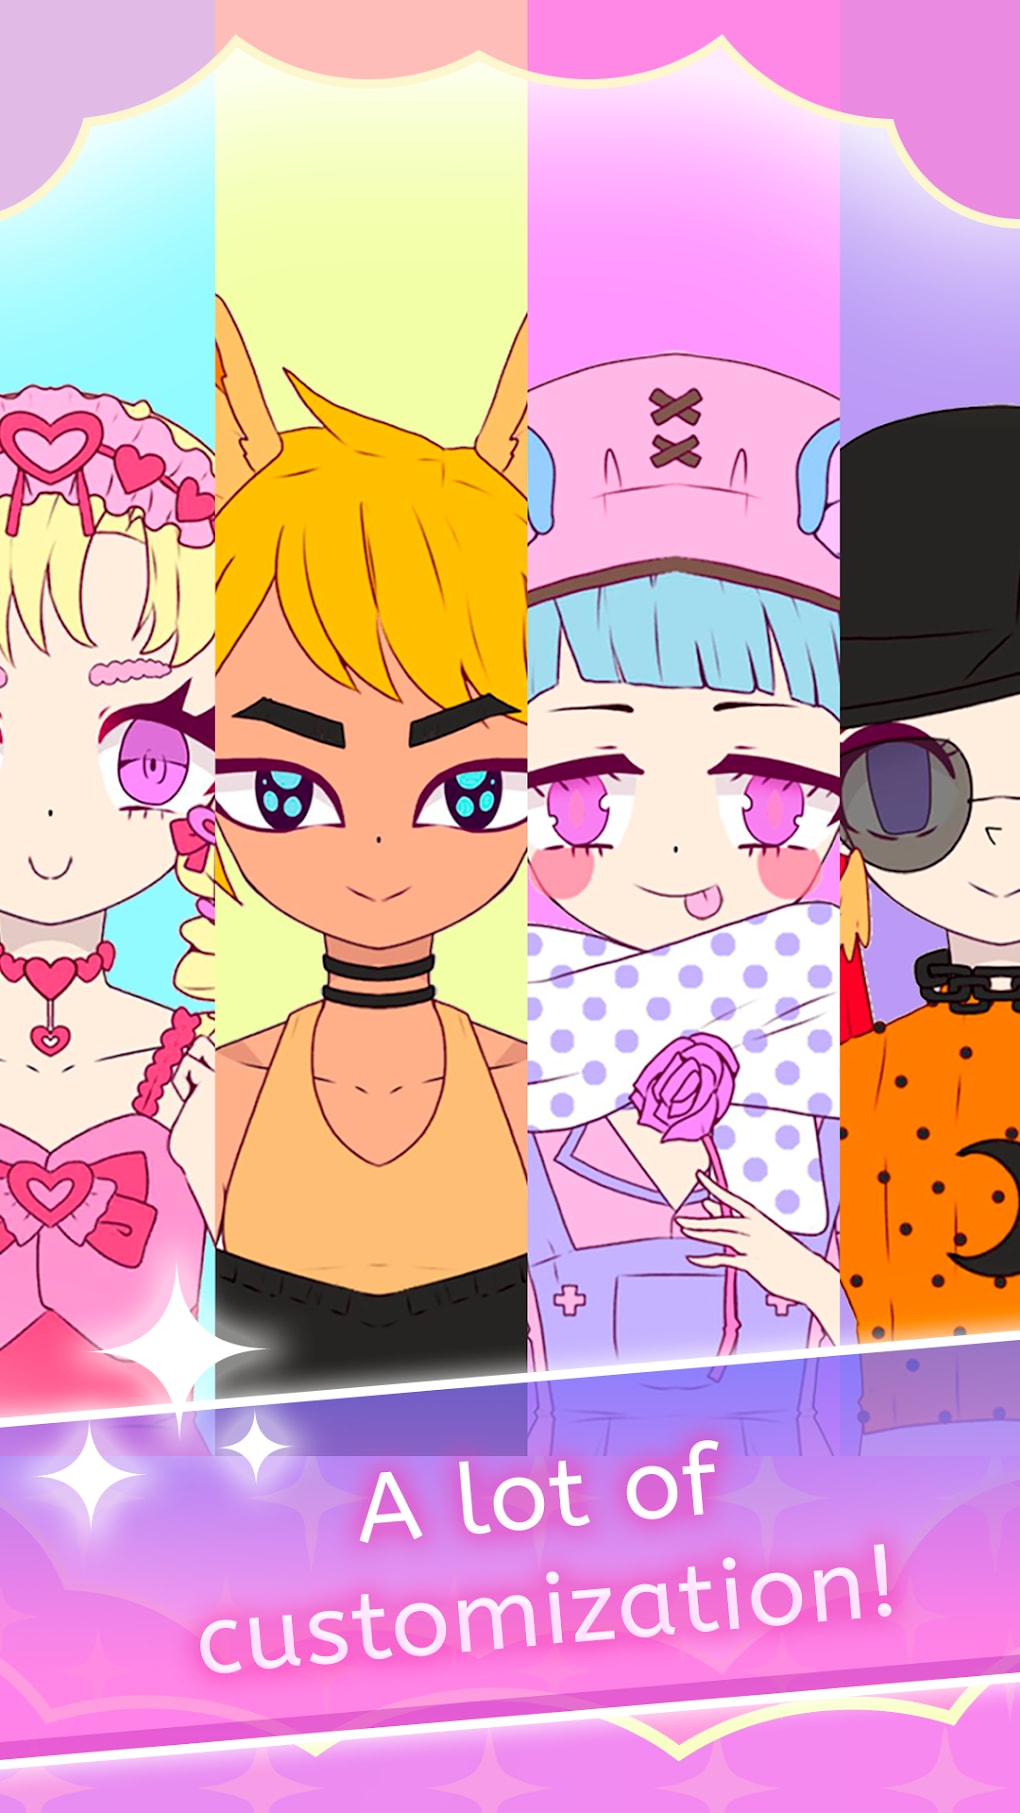 Roxie Girl anime avatar maker APK for Android - Download